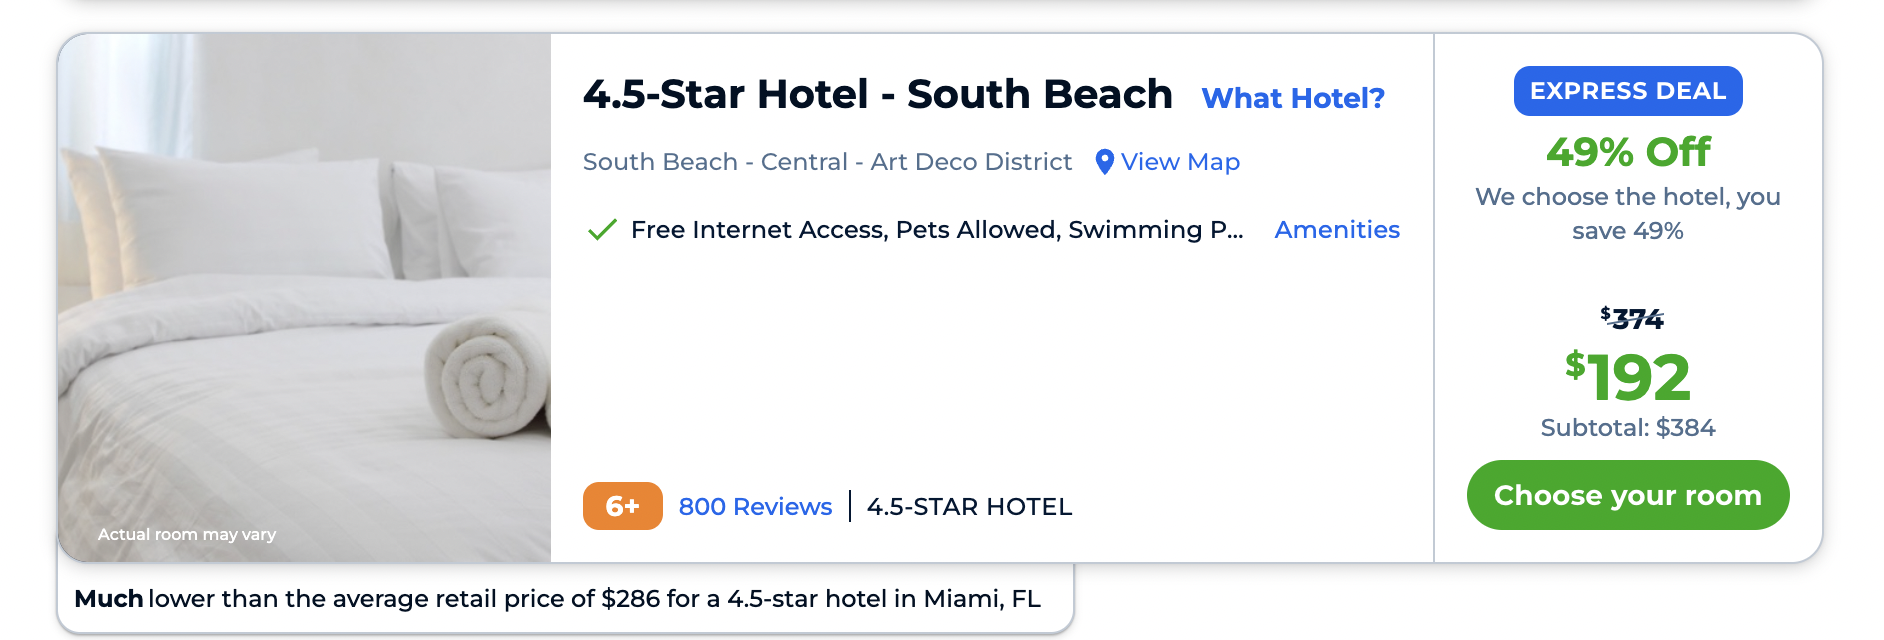 New Tool reveals hidden hotels on Priceline Express Deals and Hotwire Hot Deals - TravelArrow.io